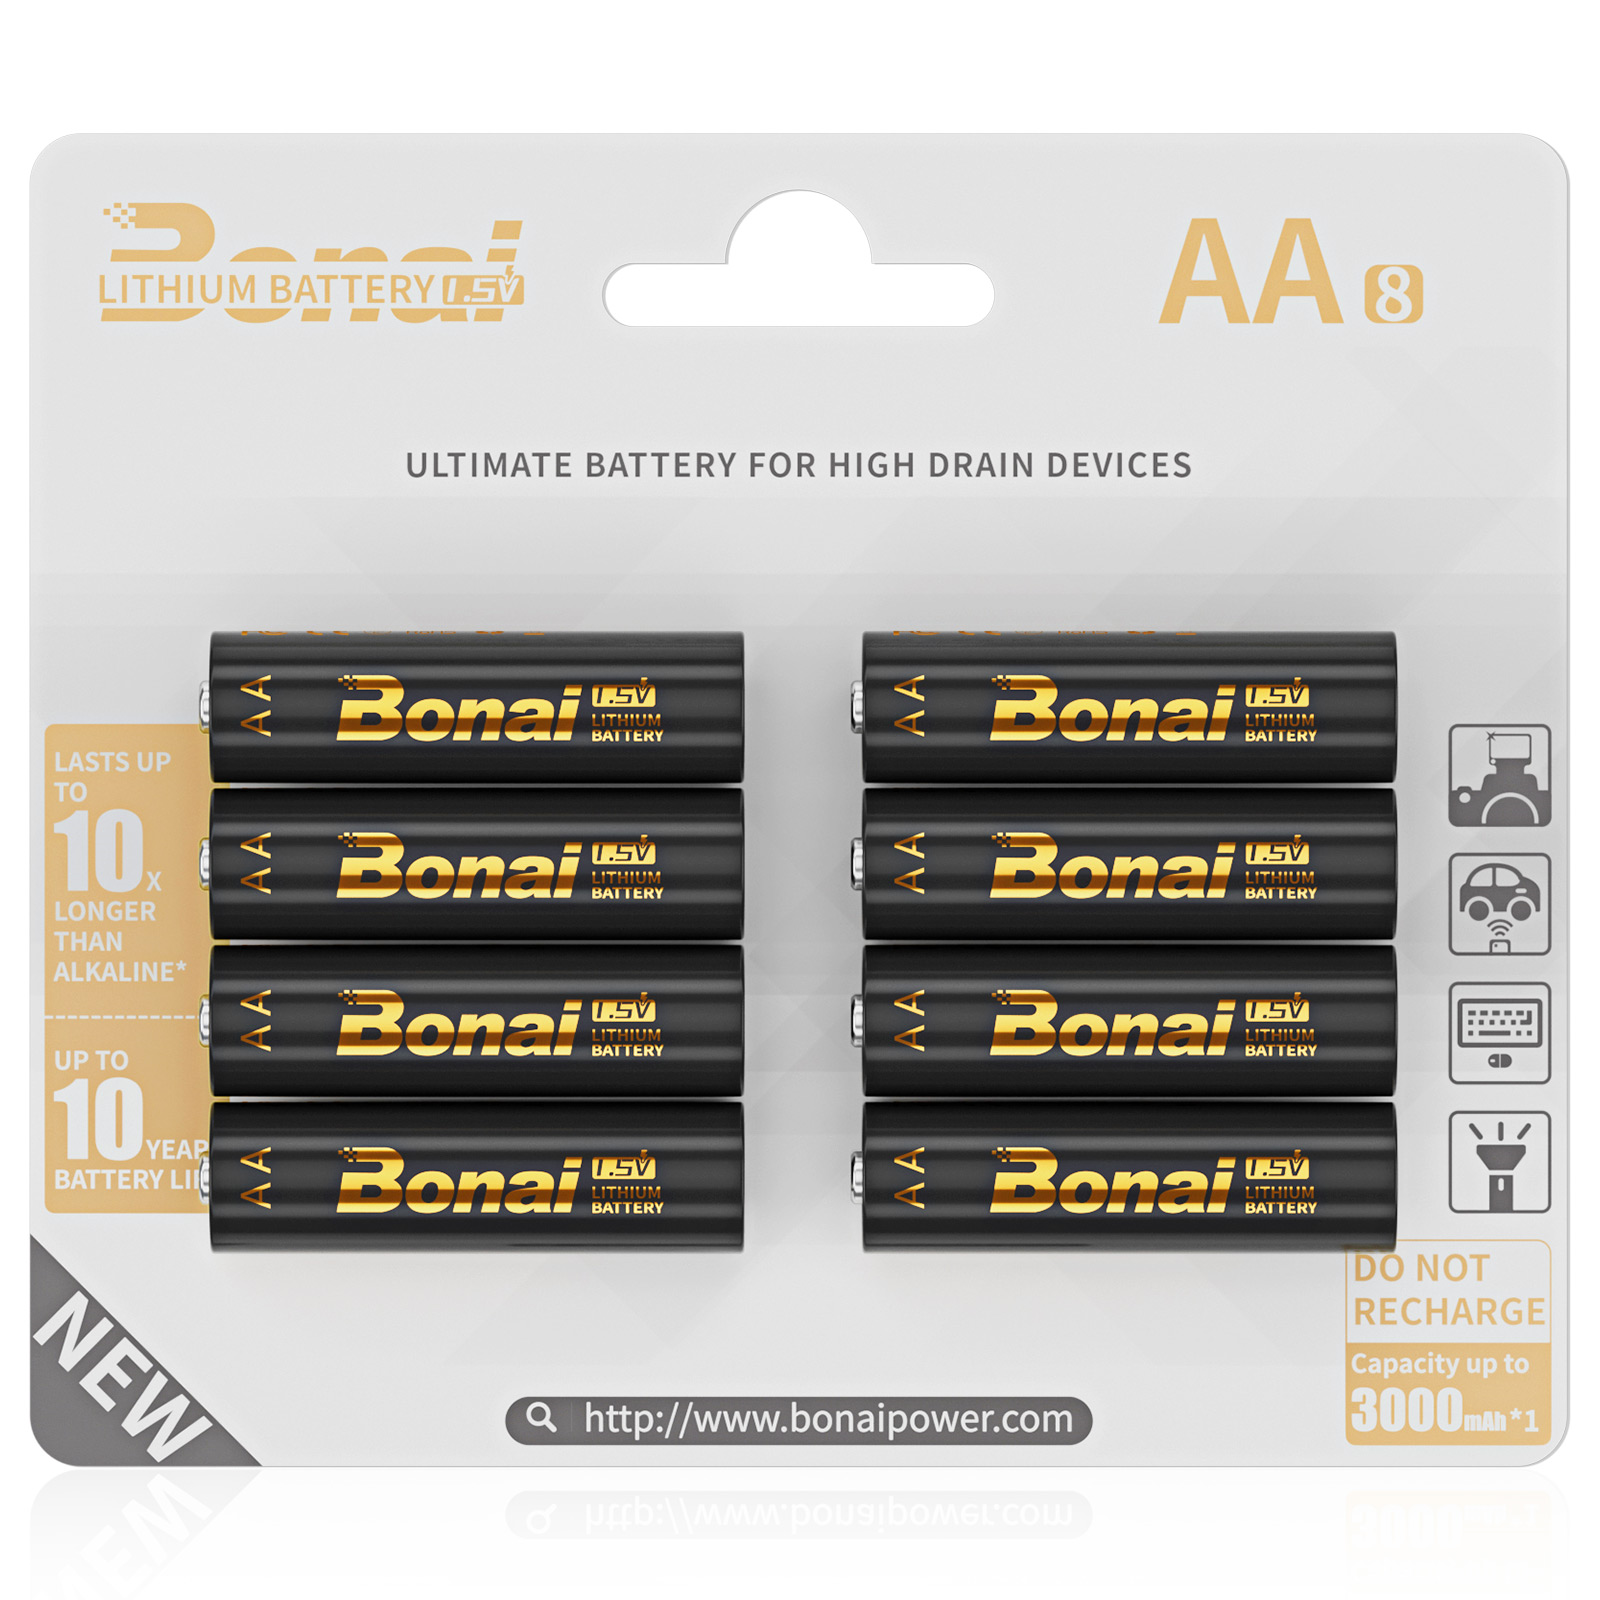 BONAI Lithium Batteries AA, 1.5V 3000mAh Longest Lasting Double A Battery - Ultimate Power for High Drain Devices, Non-Rechargeable (8 Pack)